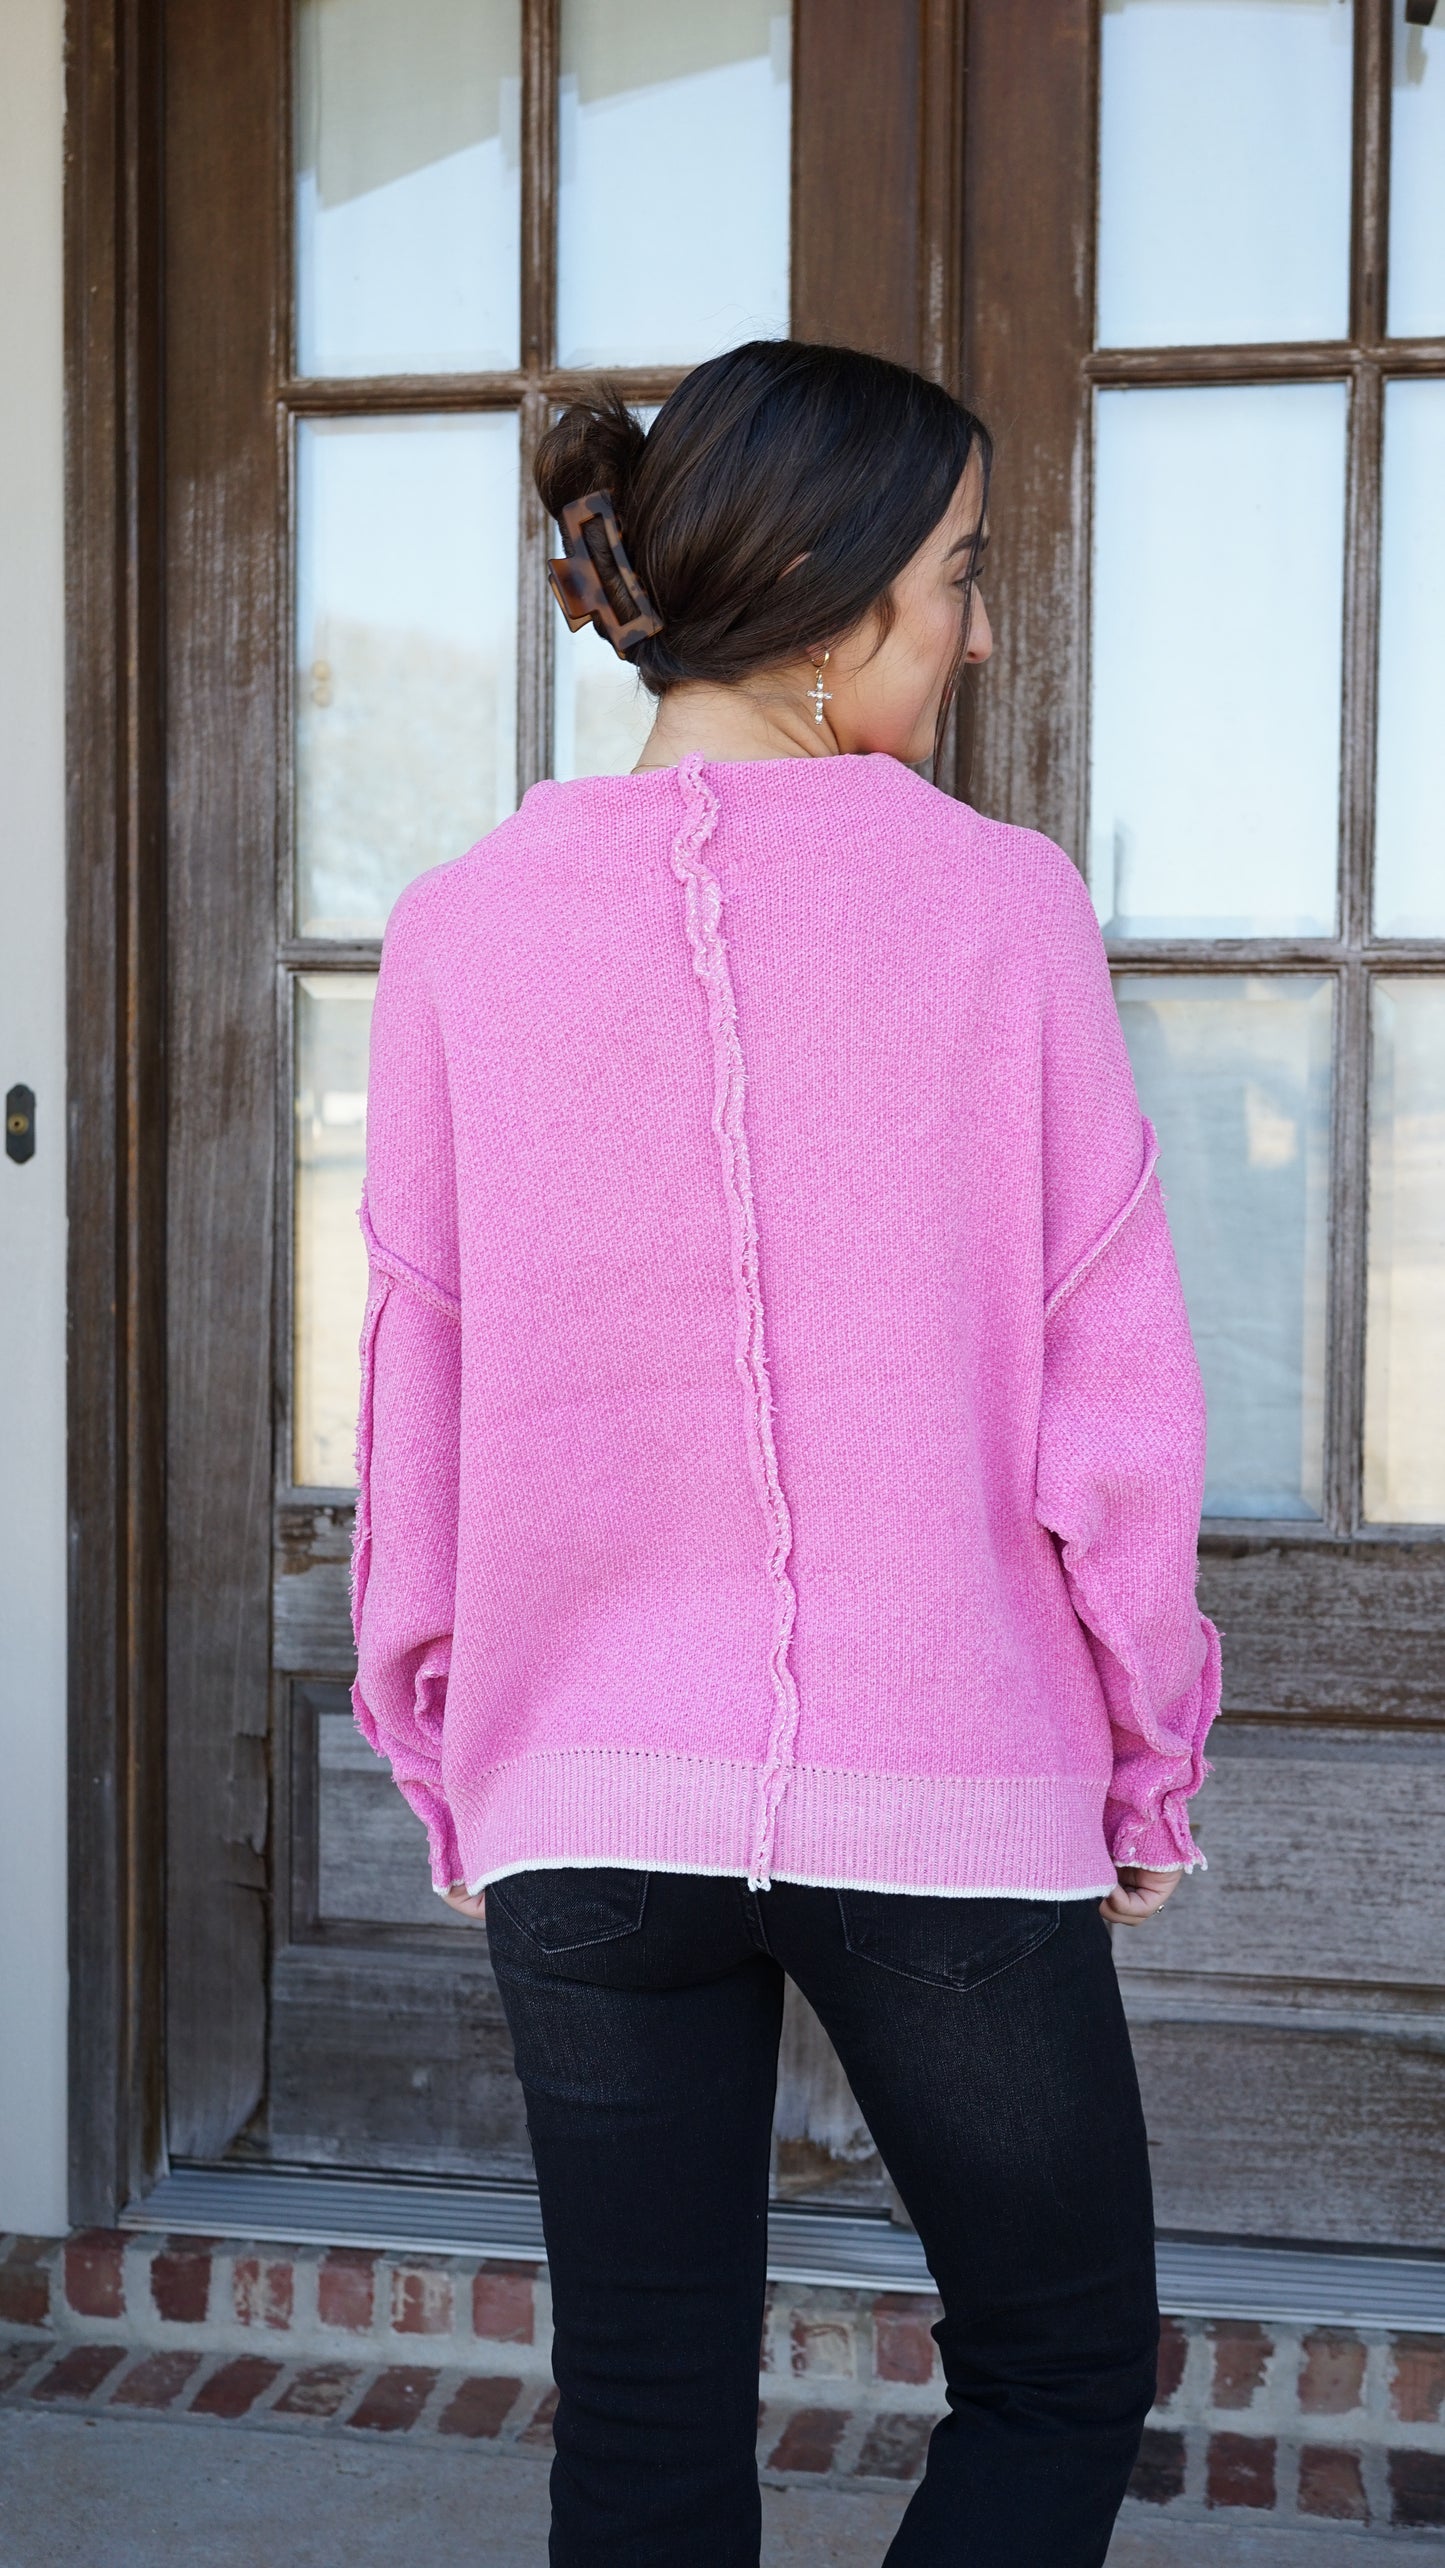 Snuggly Days Pink Sweater